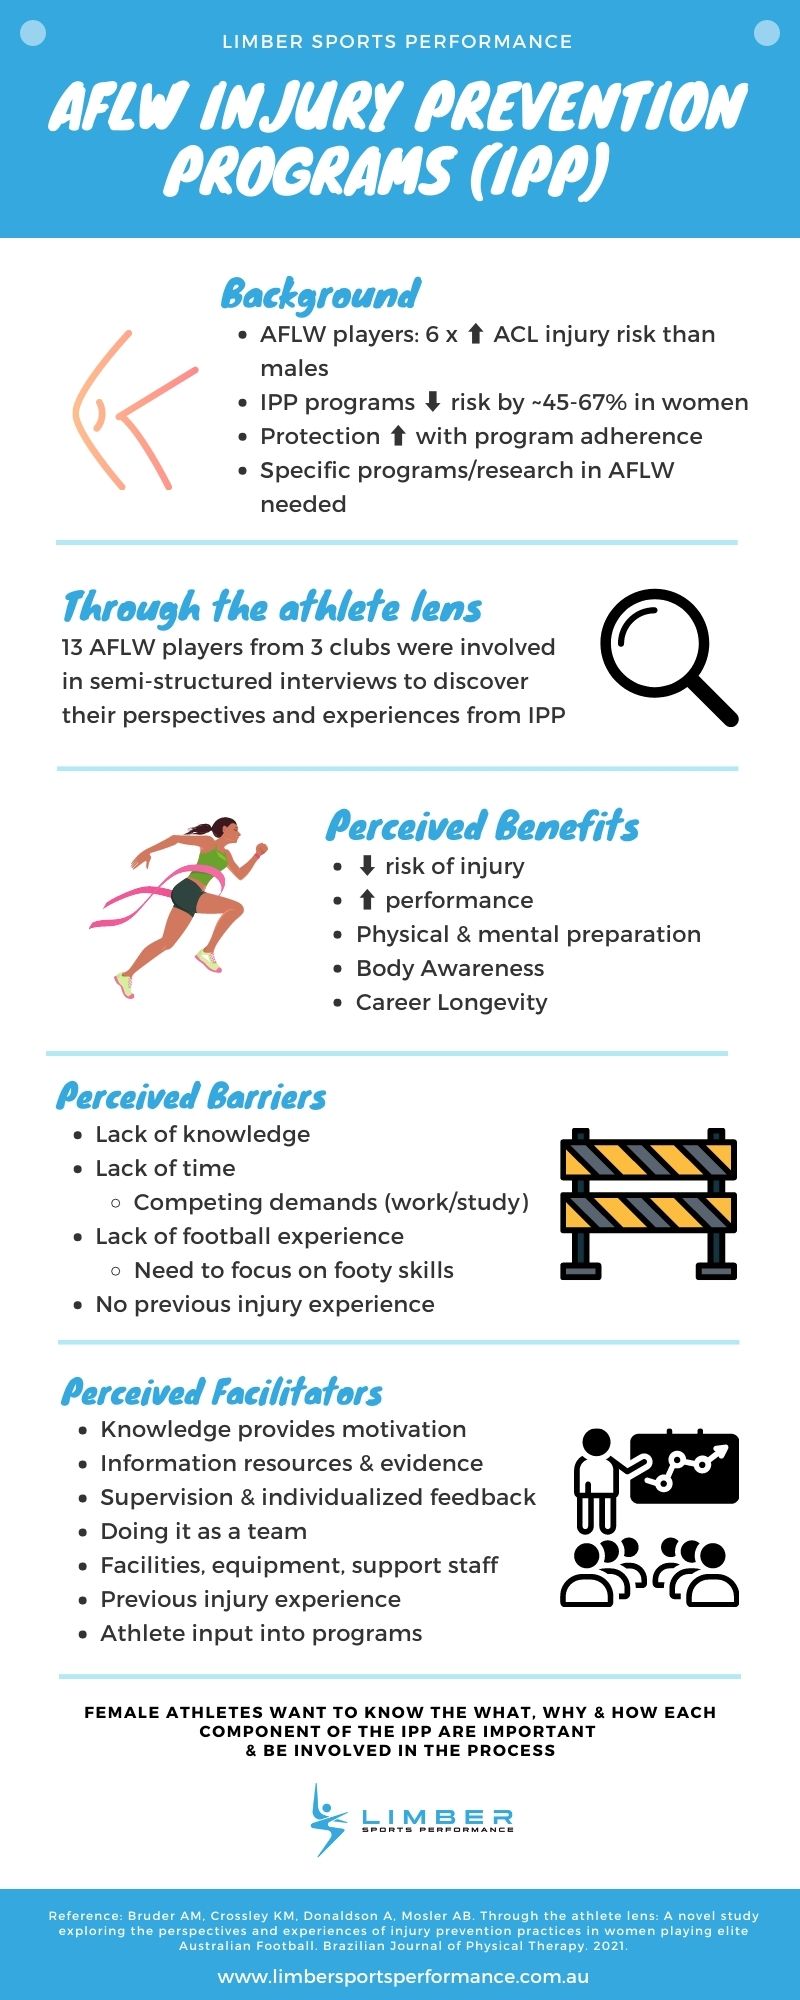 AFLW-Injury-Prevention-Athlete-Perspectives